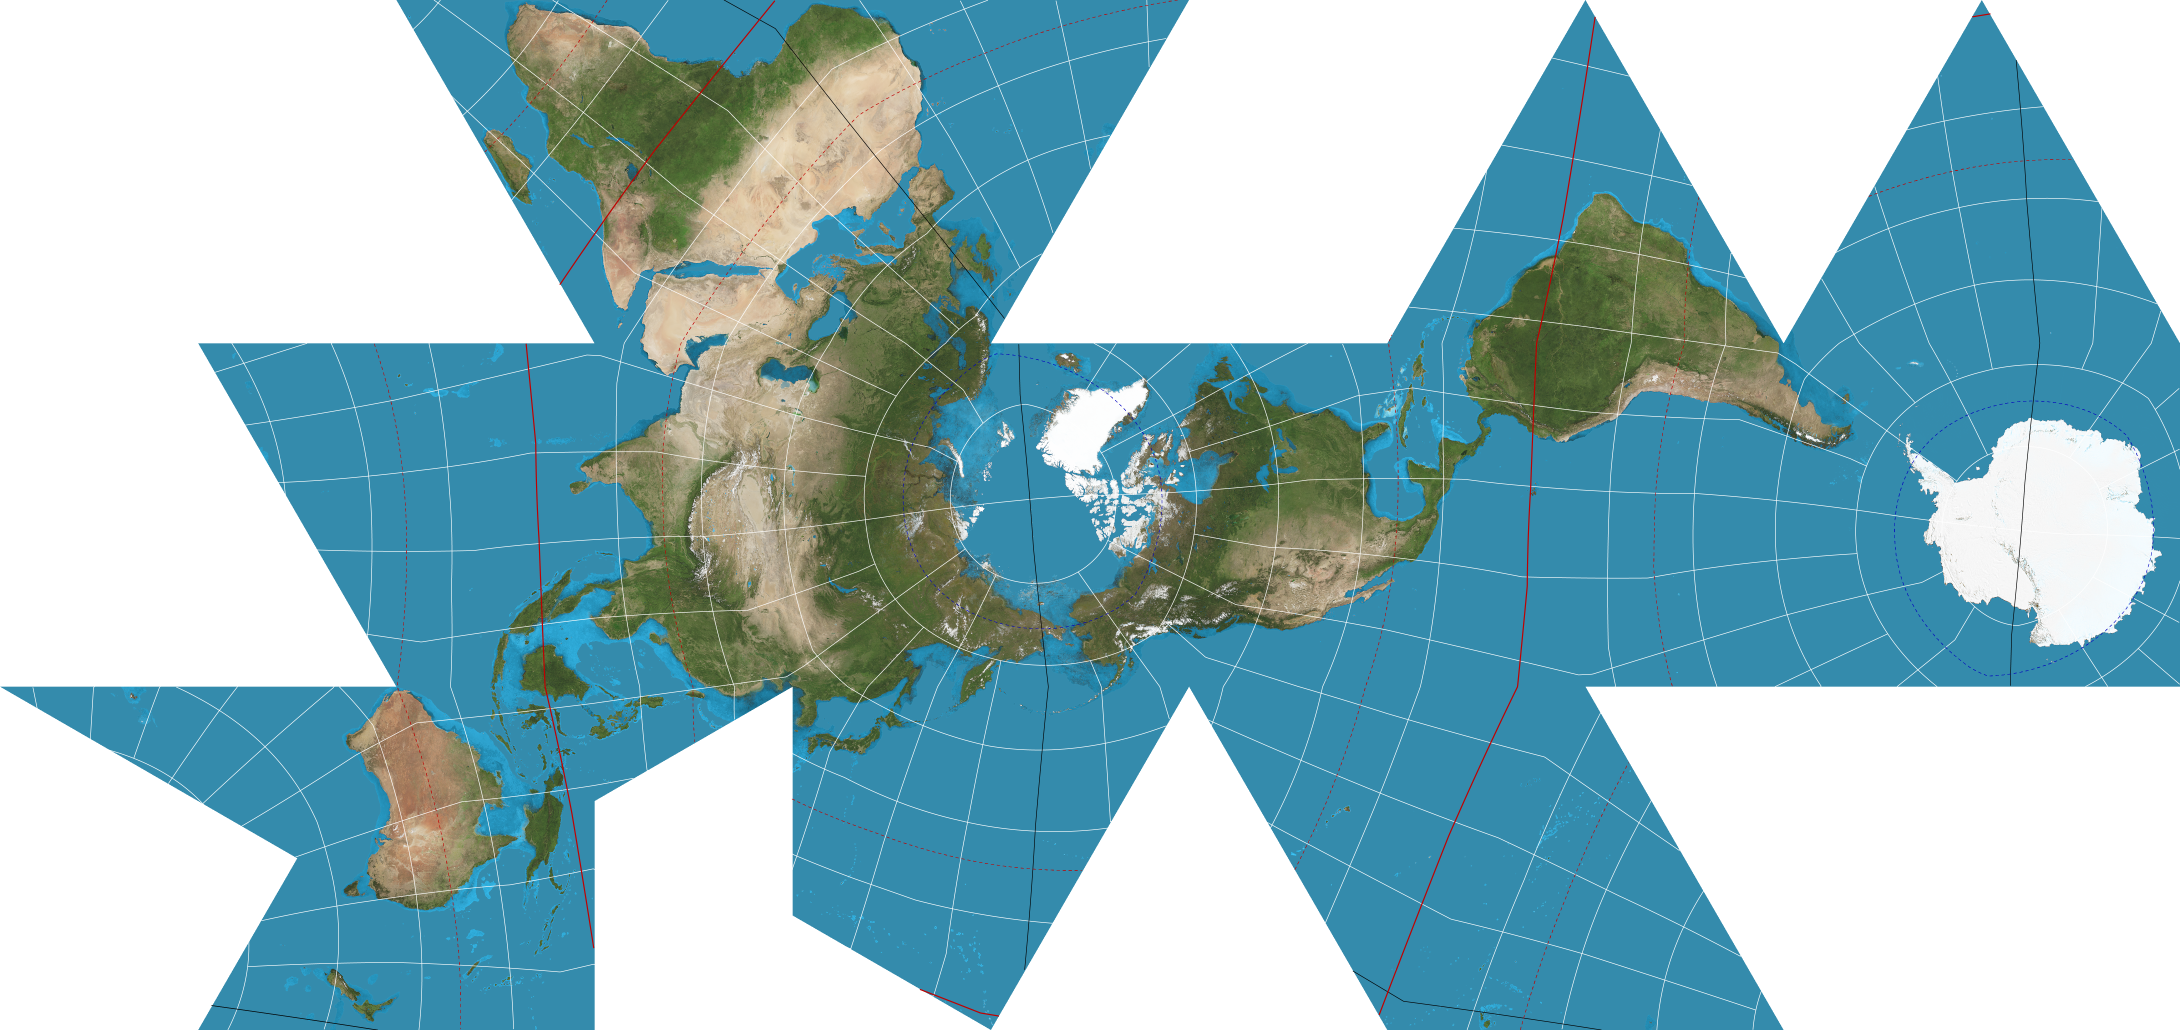 <p>(Projections)<strong>Type of interrupted map that reduces most of the distortion on sizes of areas but suffers with presenting information and cardinal directions. (compromised projection: attempt to minimize distortion by spreading it all around)</strong></p>